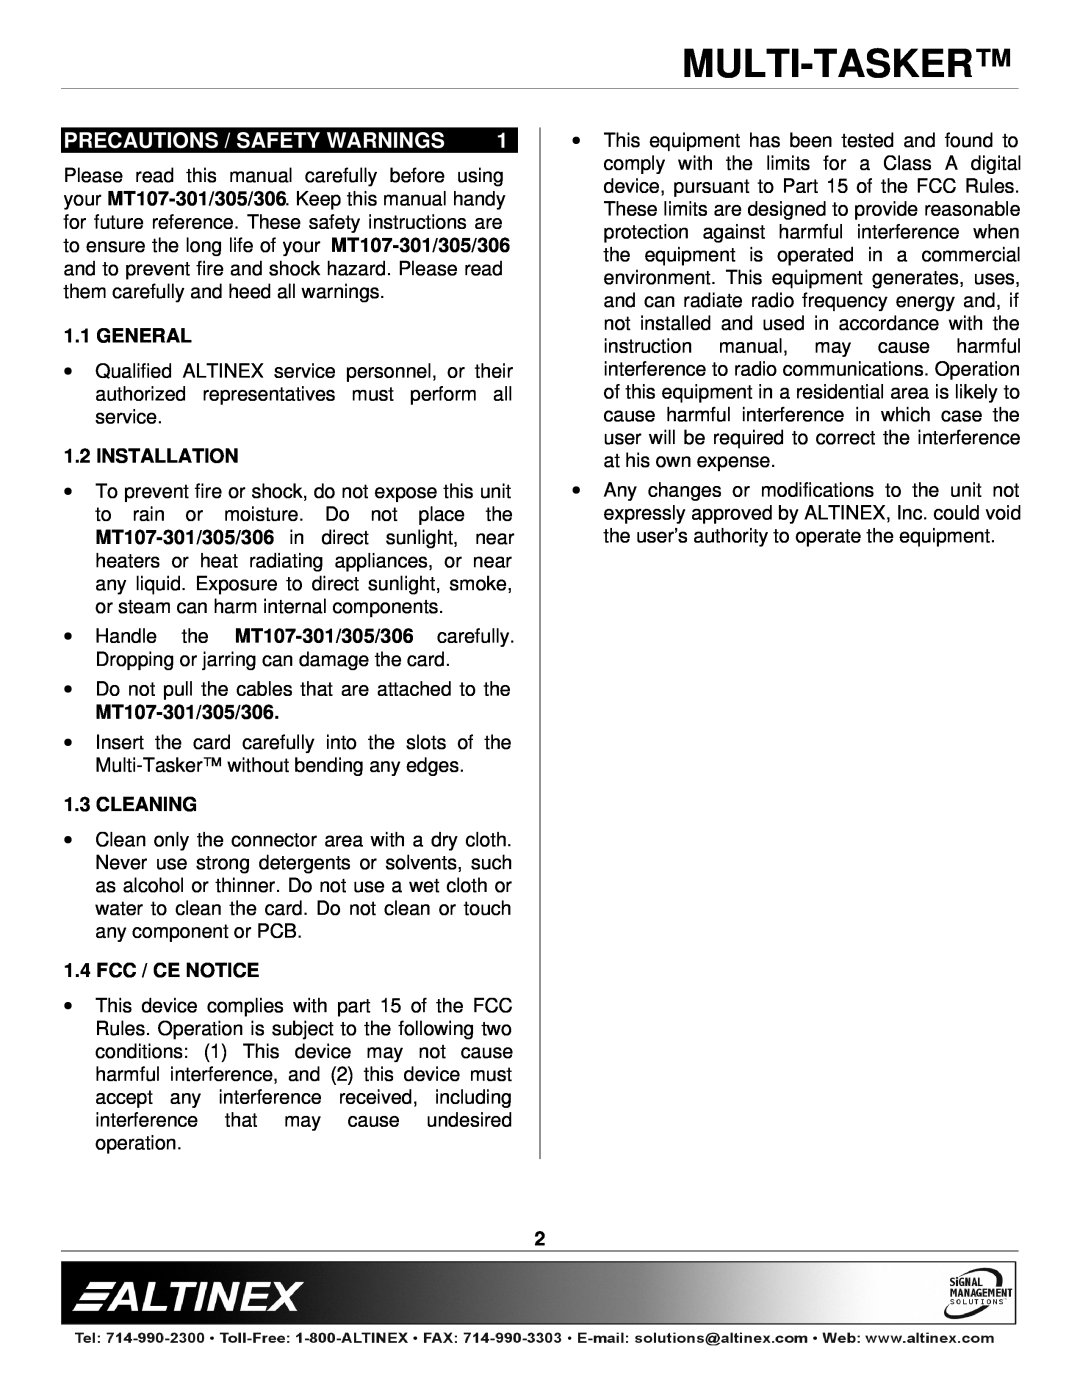 Altinex MT107-306 manual Precautions / Safety Warnings, General, Installation, MT107-301/305/306, Cleaning, Fcc / Ce Notice 